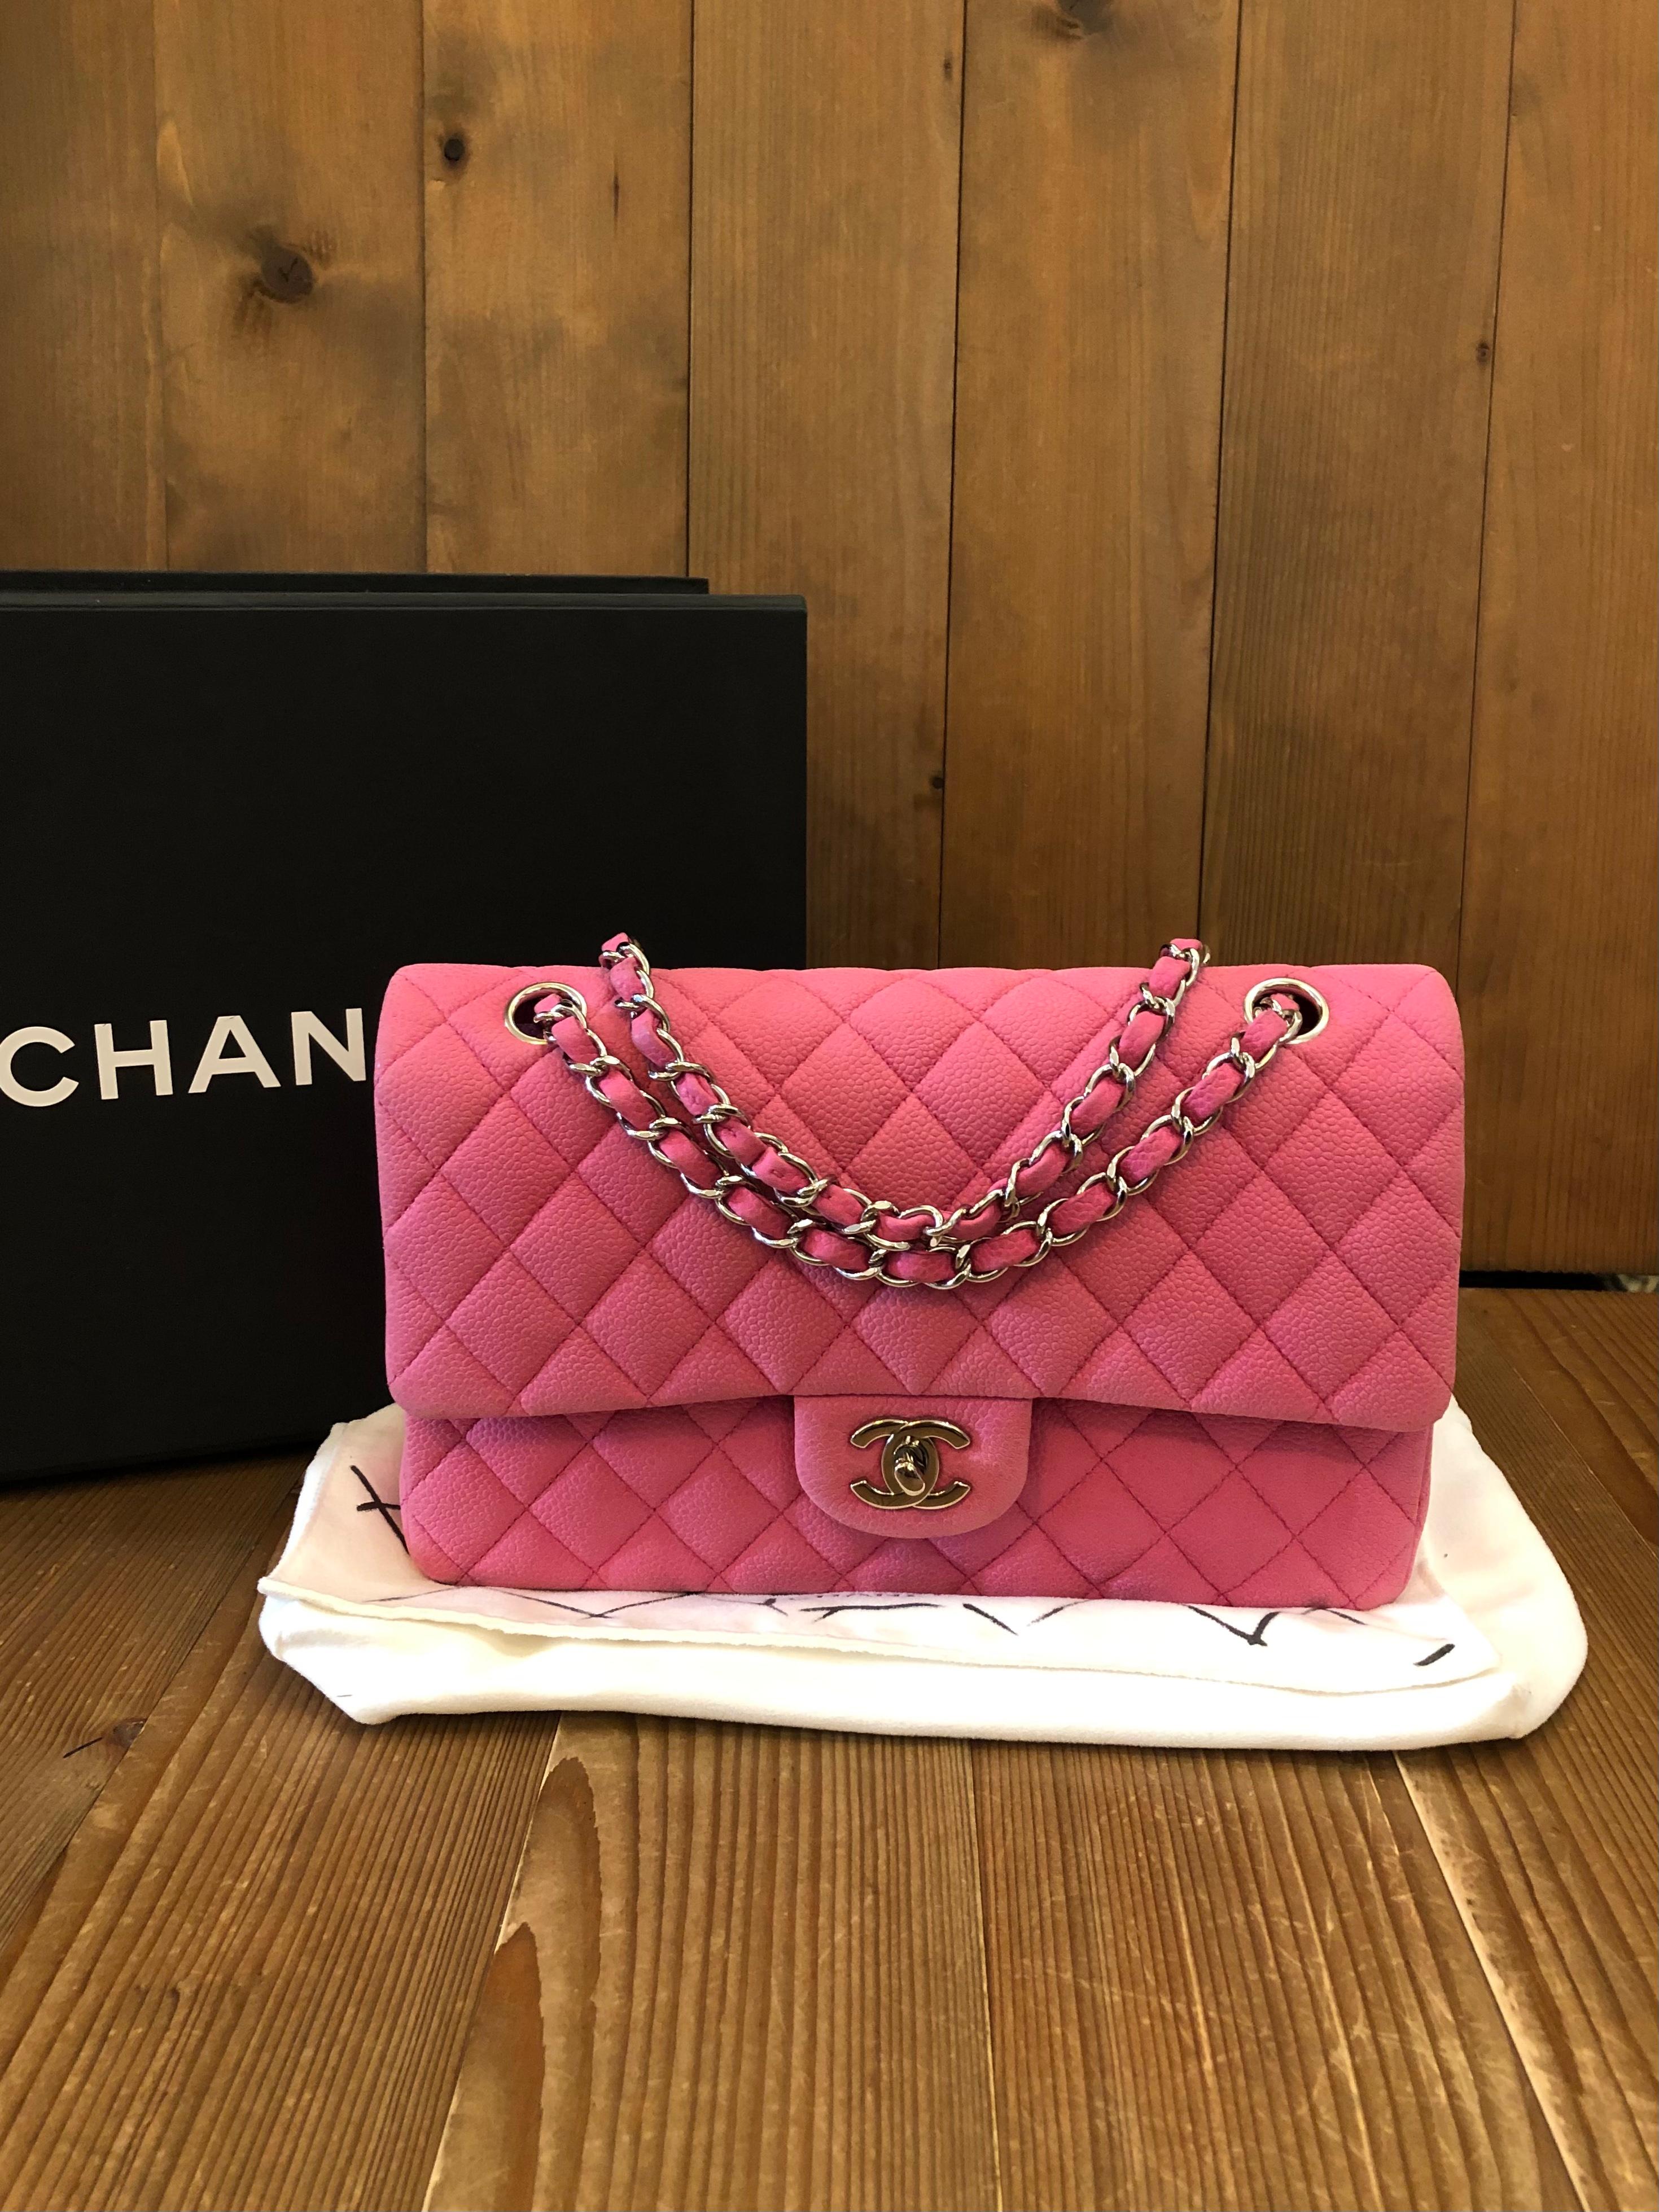 2013 Medium Chanel pink nubuck caviar classic flap bag. Made in France. Serial 18xxxxxx. Measures approximately 10 x 6.5 x 2.5 inches Chain drop 9-16 inches. Comes with Box/Authentication card/Dust bag. 

Condition:
Outside: Minor marks on caviar